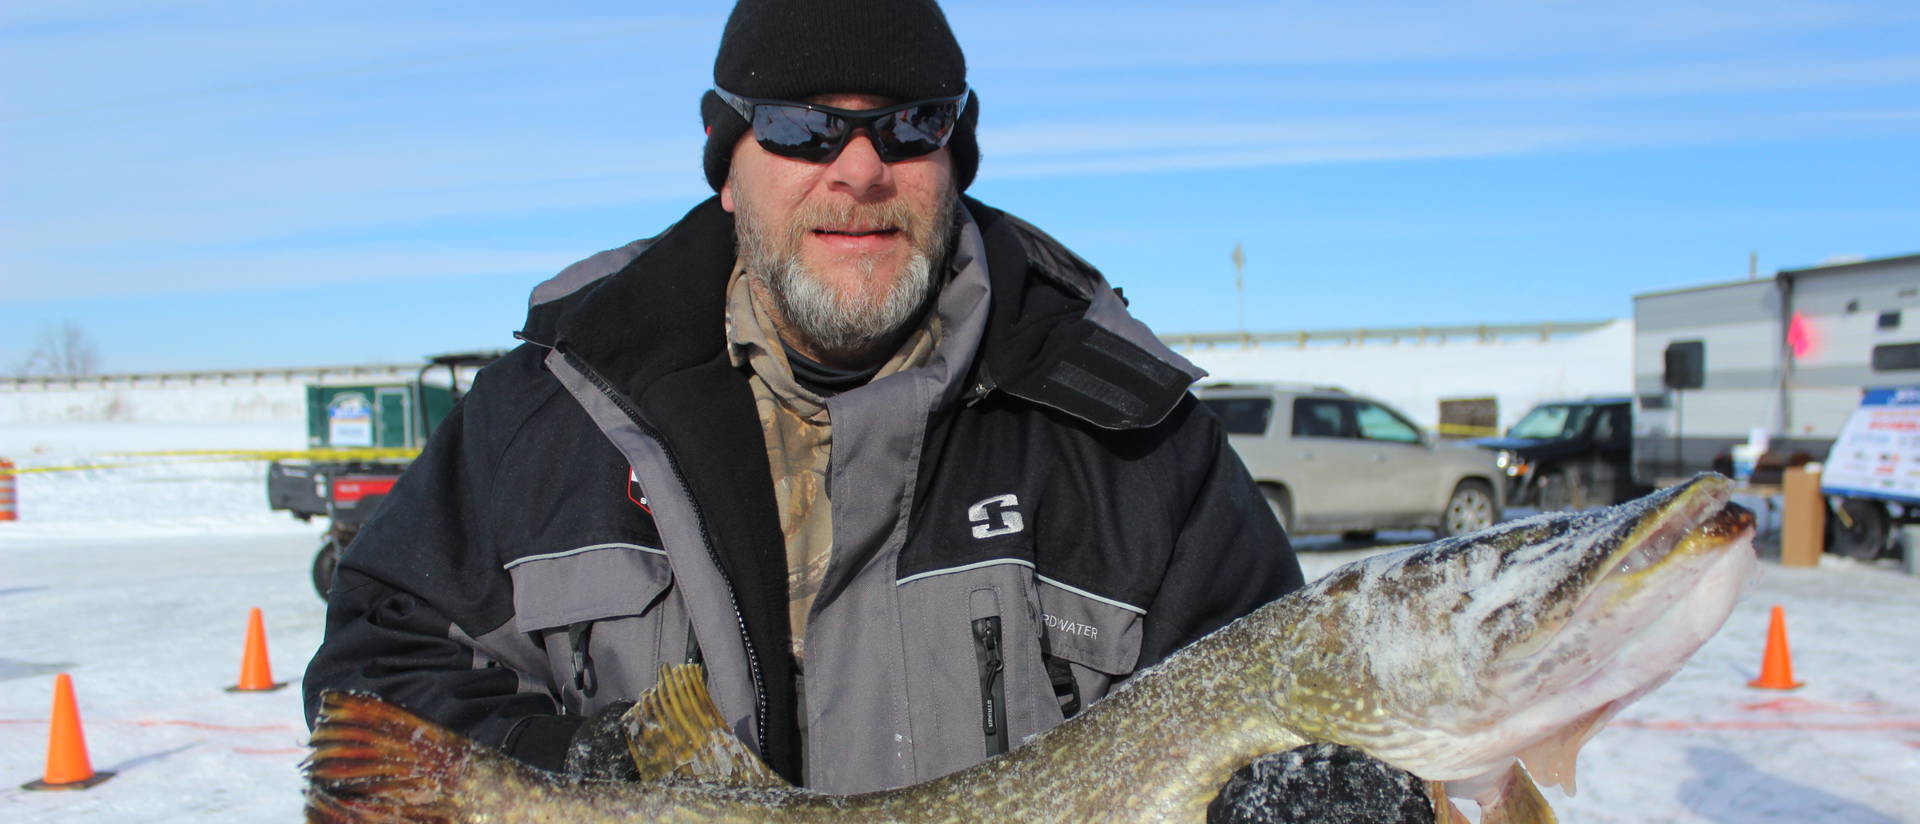 Ice fisherman holding a northern pike